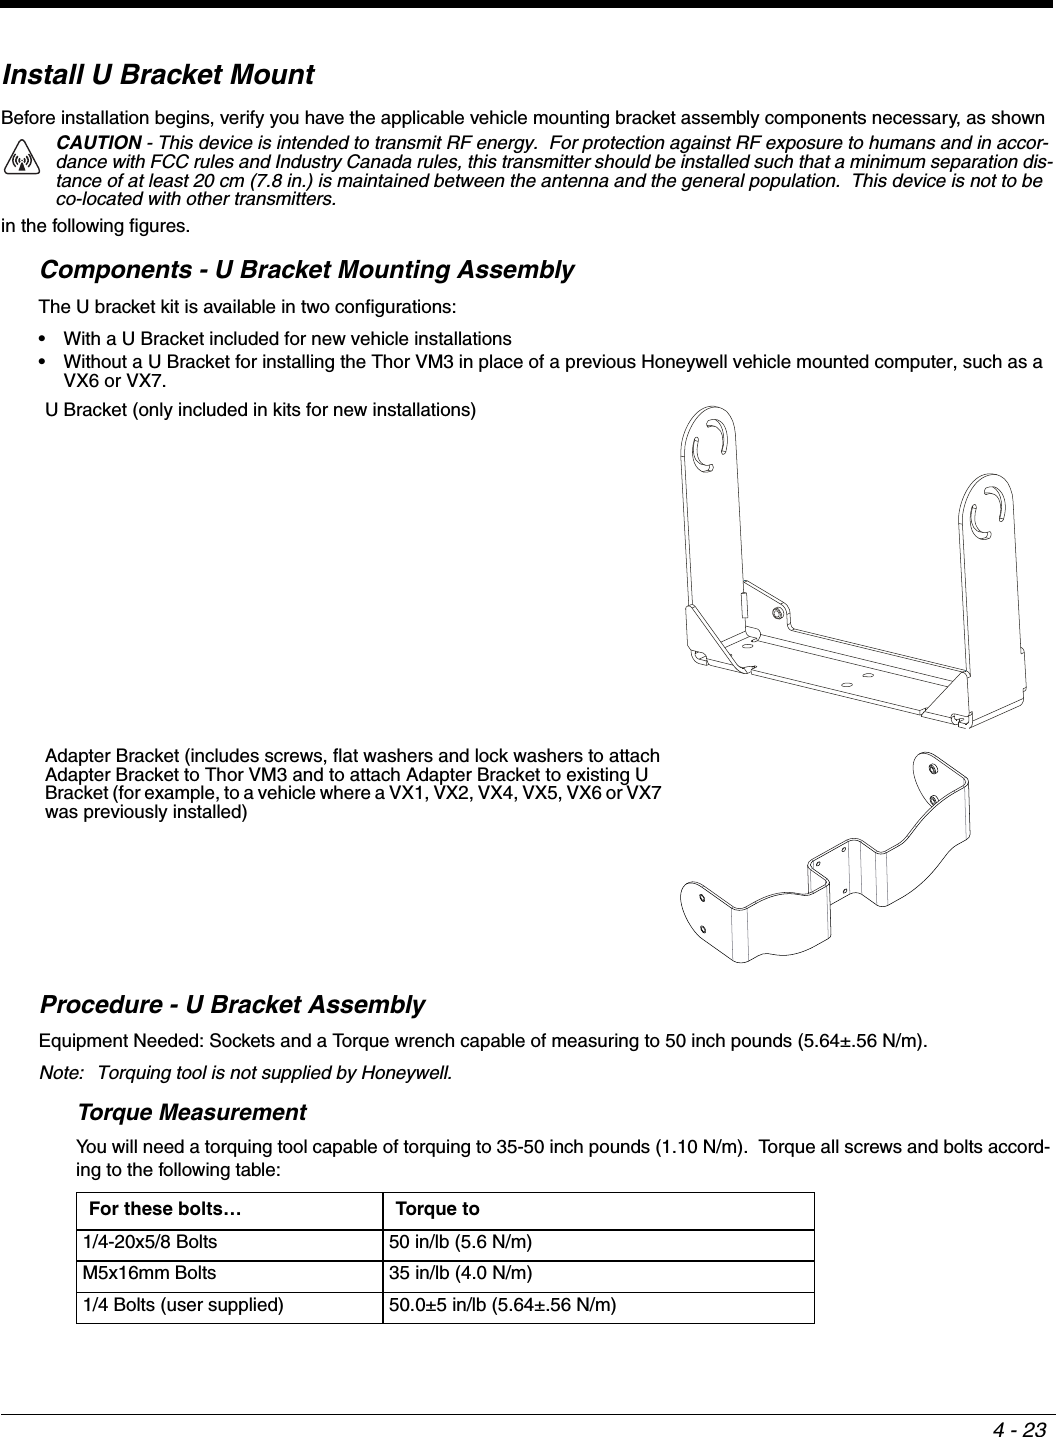 4 - 23Install U Bracket MountBefore installation begins, verify you have the applicable vehicle mounting bracket assembly components necessary, as shown in the following figures.Components - U Bracket Mounting AssemblyThe U bracket kit is available in two configurations:• With a U Bracket included for new vehicle installations• Without a U Bracket for installing the Thor VM3 in place of a previous Honeywell vehicle mounted computer, such as a VX6 or VX7.Procedure - U Bracket AssemblyEquipment Needed: Sockets and a Torque wrench capable of measuring to 50 inch pounds (5.64±.56 N/m). Note: Torquing tool is not supplied by Honeywell.Torque MeasurementYou will need a torquing tool capable of torquing to 35-50 inch pounds (1.10 N/m).  Torque all screws and bolts accord-ing to the following table:CAUTION - This device is intended to transmit RF energy.  For protection against RF exposure to humans and in accor-dance with FCC rules and Industry Canada rules, this transmitter should be installed such that a minimum separation dis-tance of at least 20 cm (7.8 in.) is maintained between the antenna and the general population.  This device is not to be co-located with other transmitters.U Bracket (only included in kits for new installations)Adapter Bracket (includes screws, flat washers and lock washers to attach Adapter Bracket to Thor VM3 and to attach Adapter Bracket to existing U Bracket (for example, to a vehicle where a VX1, VX2, VX4, VX5, VX6 or VX7 was previously installed)For these bolts… Torque to1/4-20x5/8 Bolts 50 in/lb (5.6 N/m)M5x16mm Bolts 35 in/lb (4.0 N/m)1/4 Bolts (user supplied) 50.0±5 in/lb (5.64±.56 N/m)